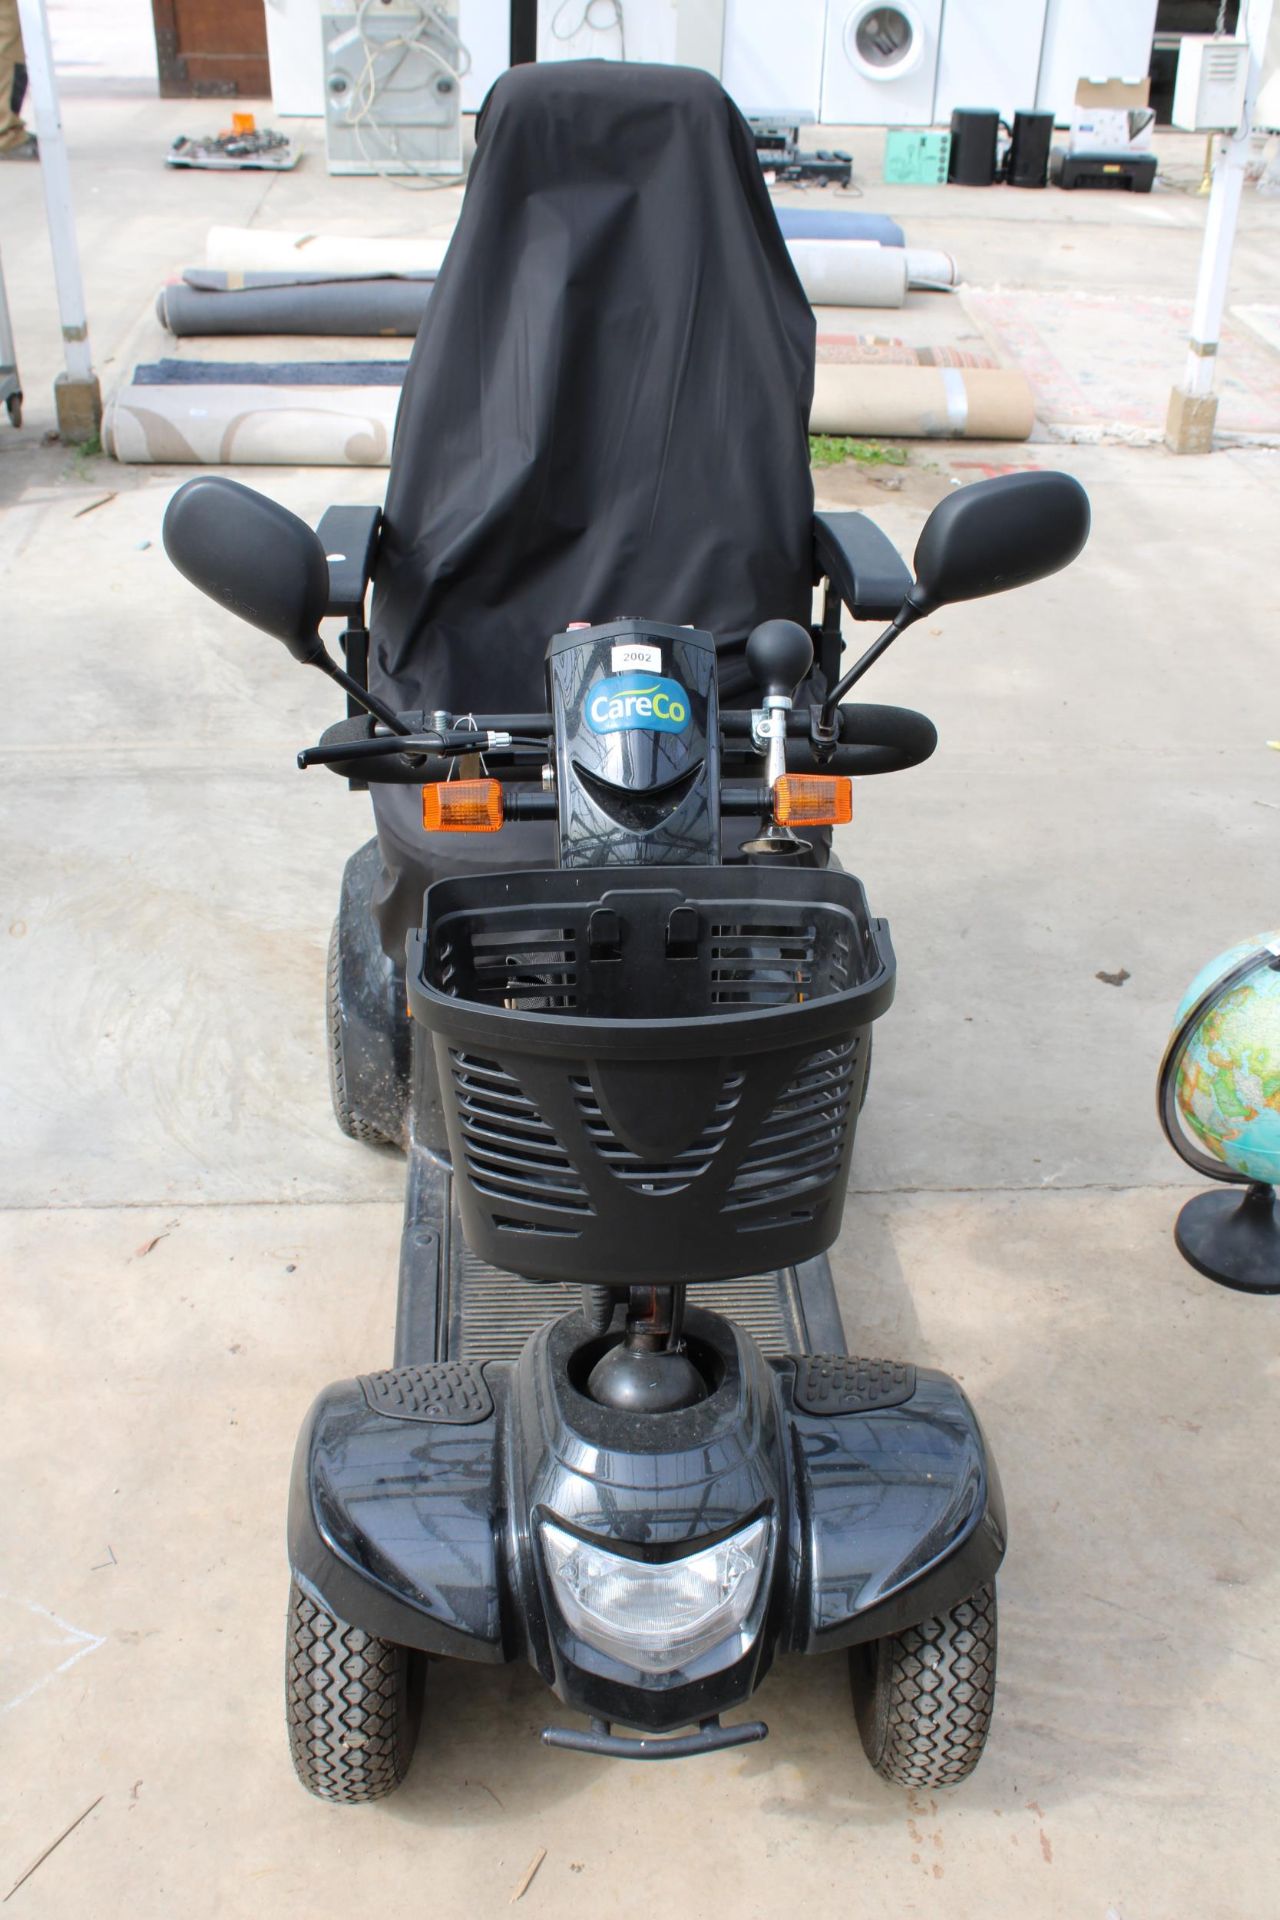 A FOUR WHEEL CARE CO ELECTRIC MOBILITY SCOOTER COMPLETE WITH CHARGER - Image 2 of 7